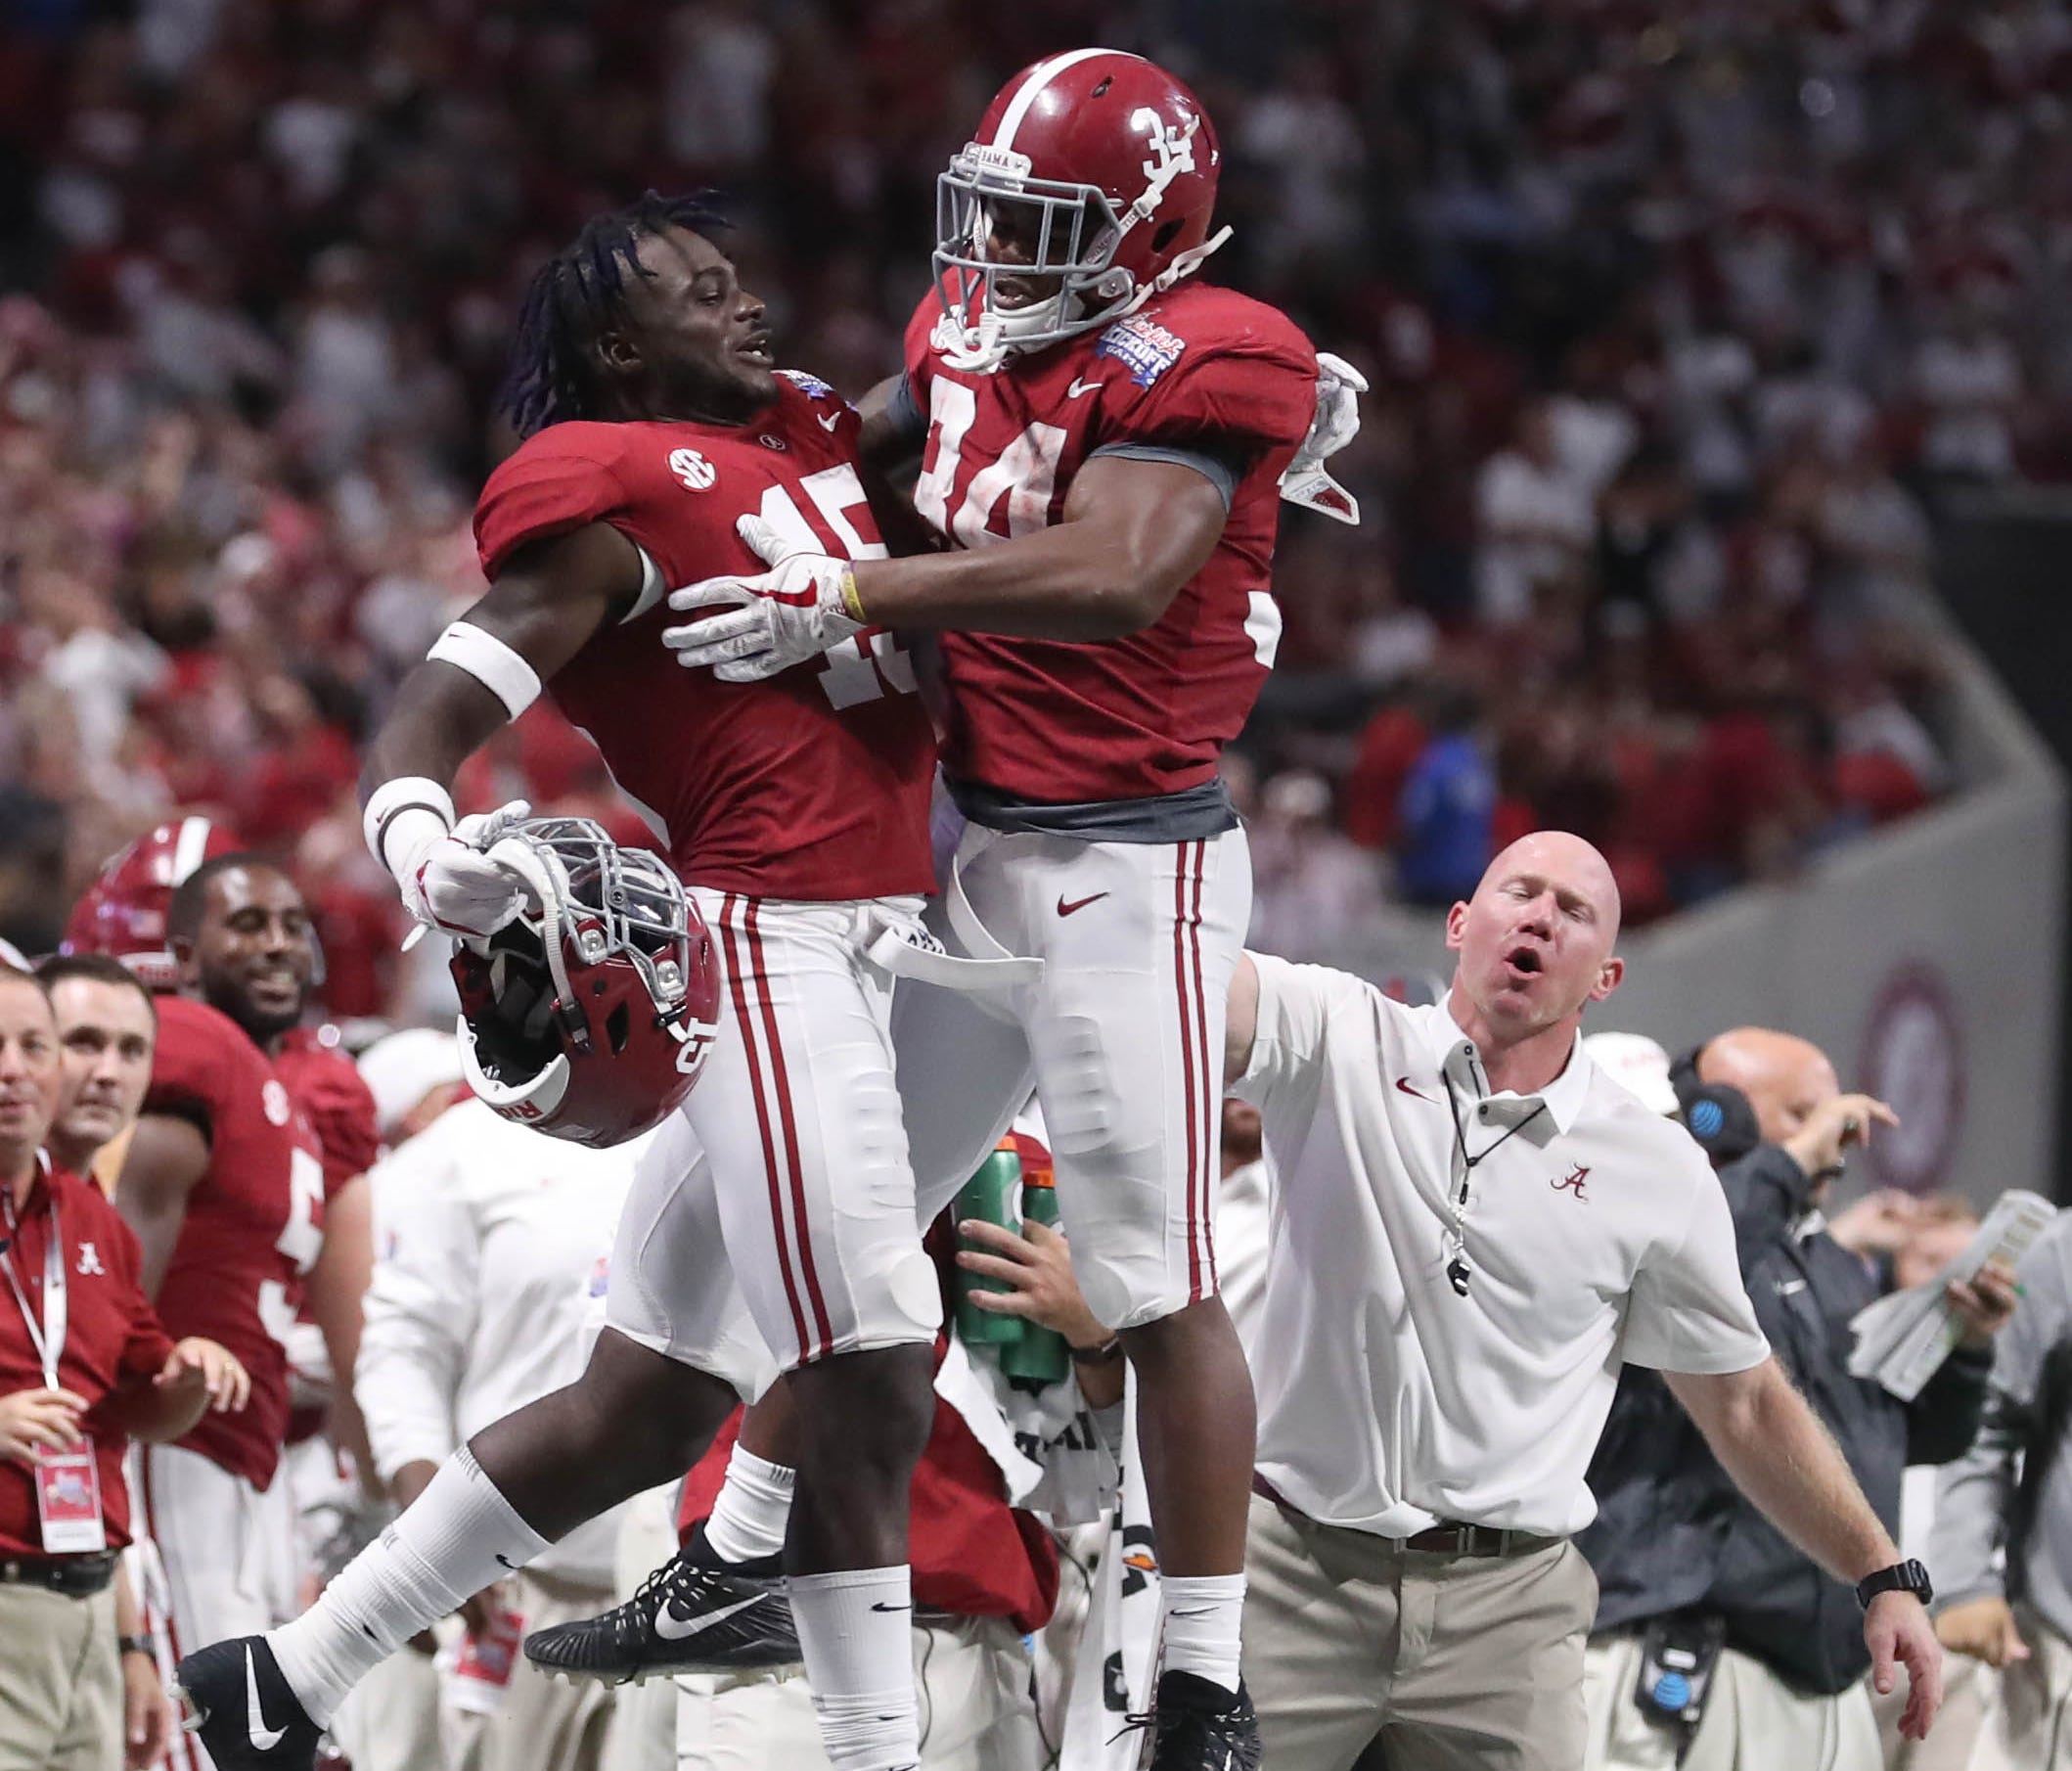 Alabama running back Damien Harris celebrates with defensive back Ronnie Harrison after scoring a touchdown in the third quarter against Florida State at Mercedes-Benz Stadium.